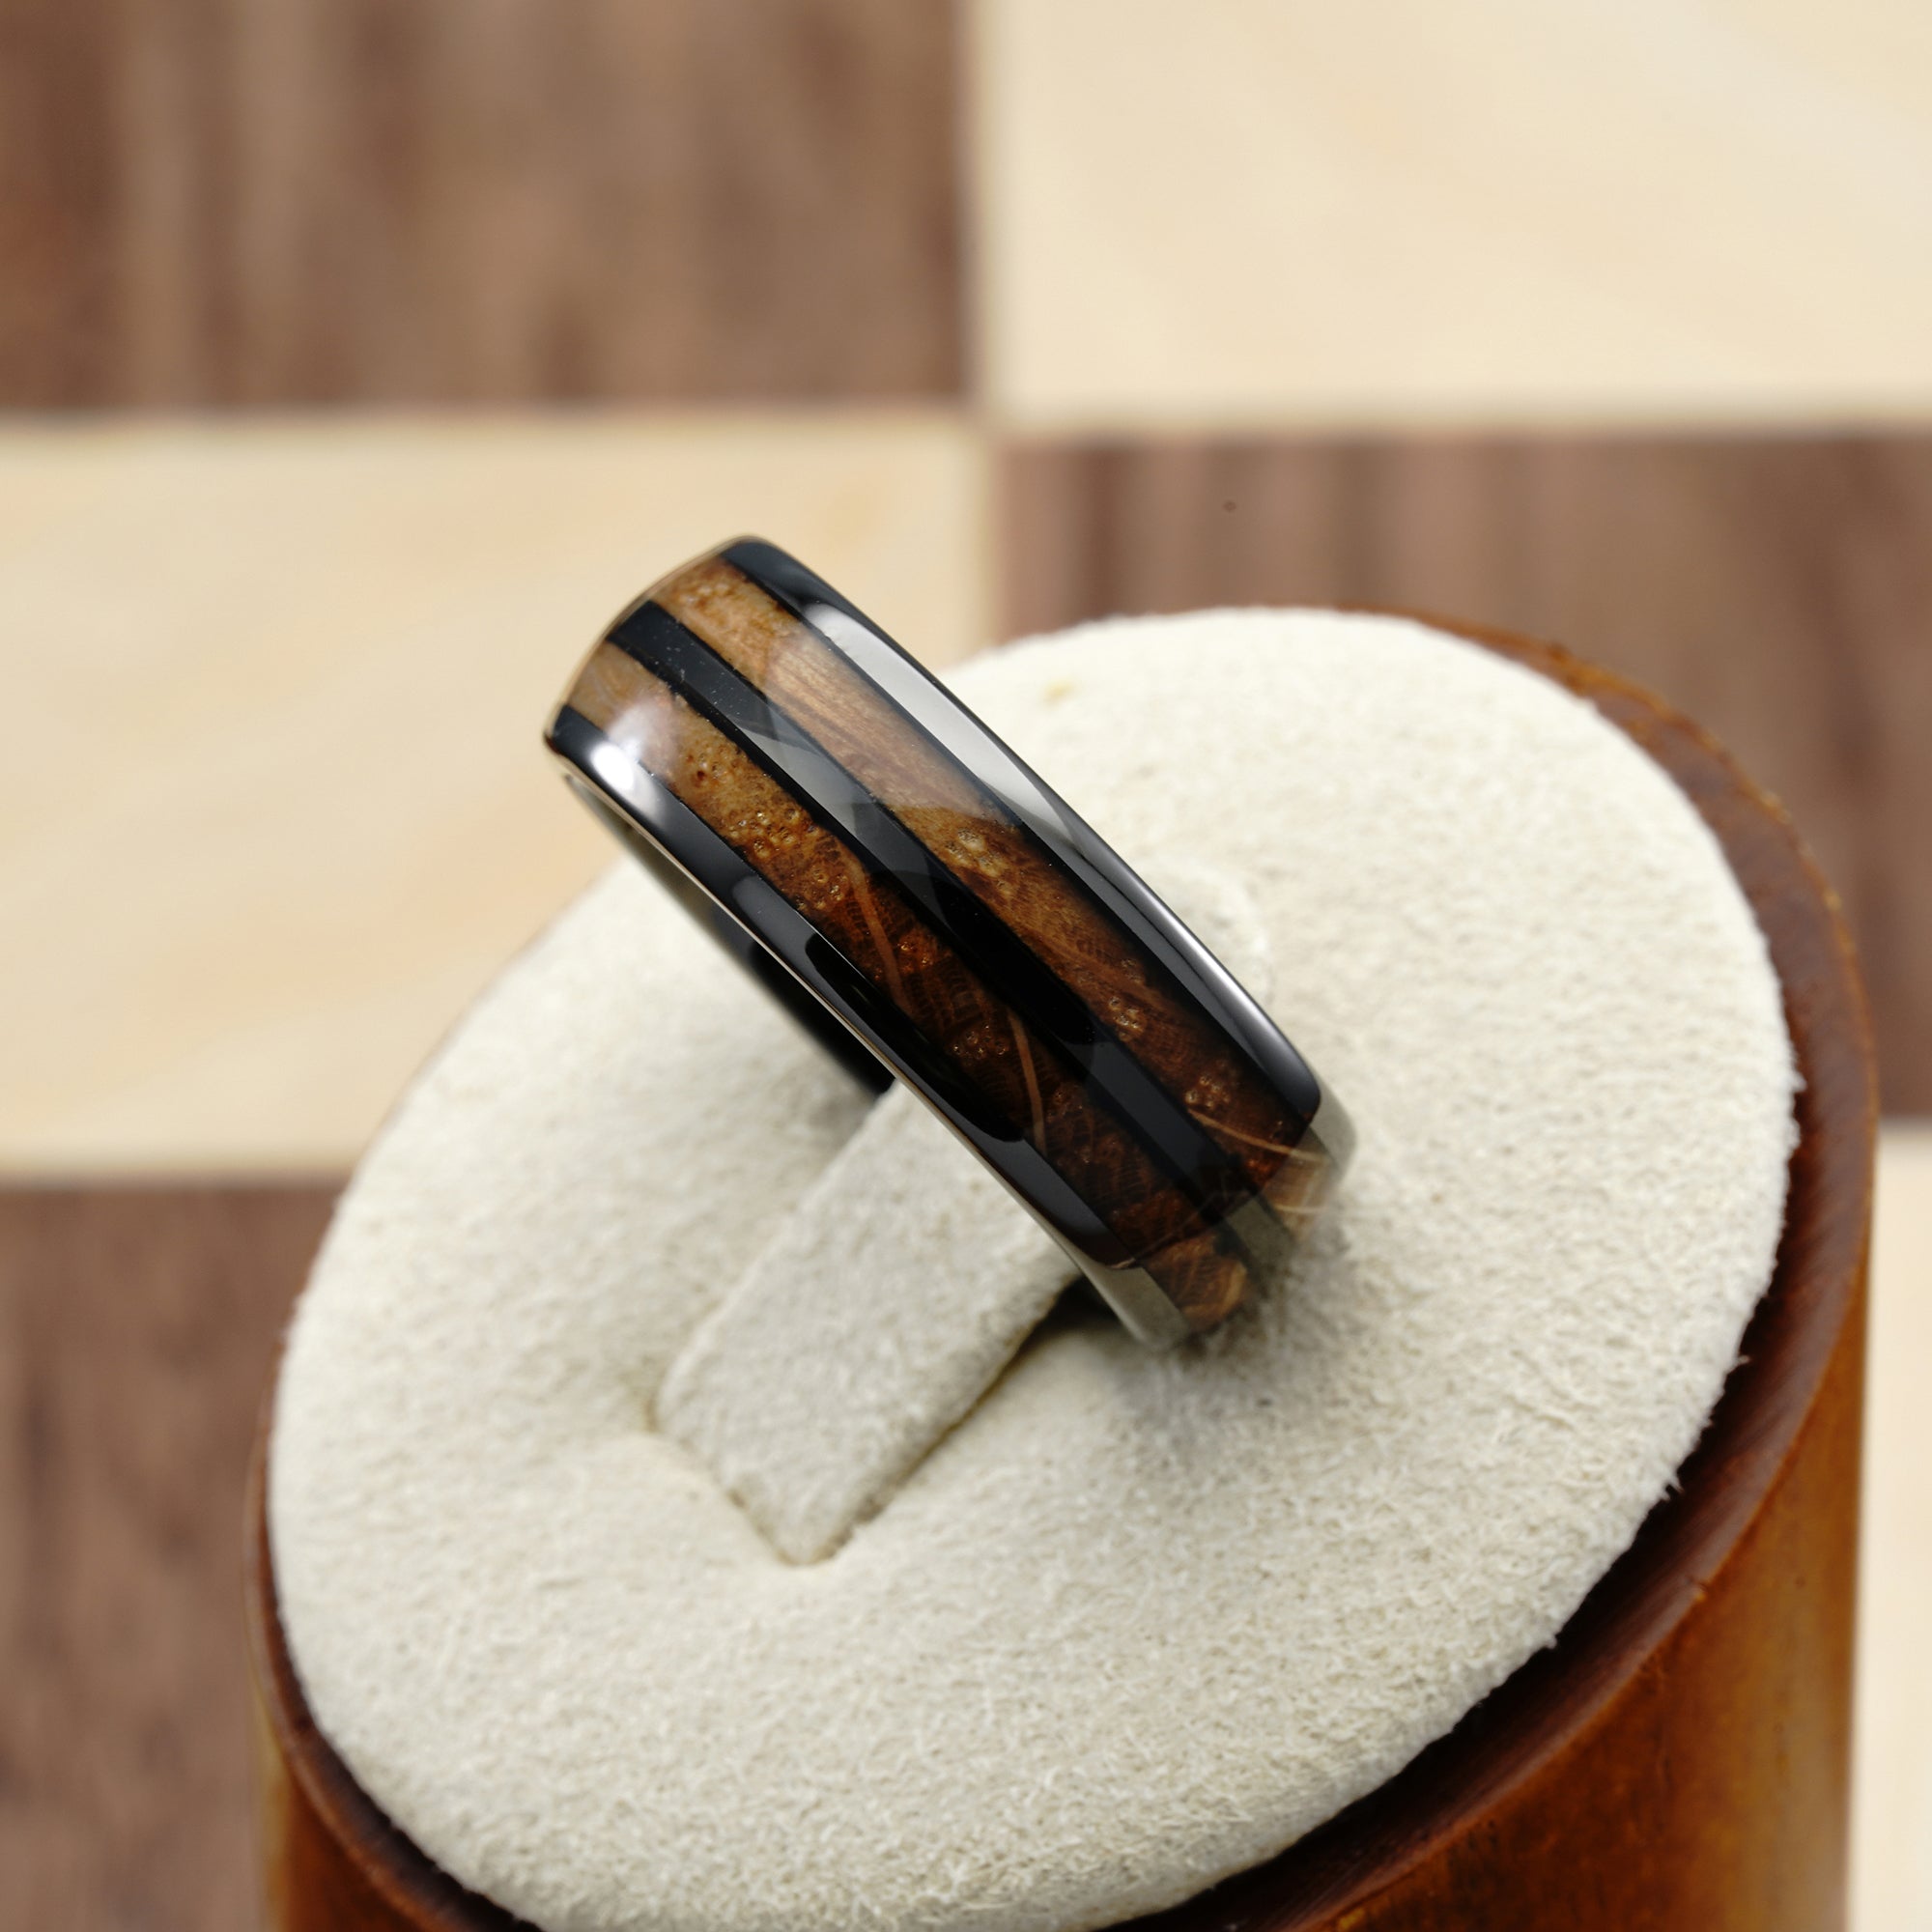 Amazon.com: Men's wooden ring with gray resin and gold flakes. Resin wood  rings for men. : Handmade Products